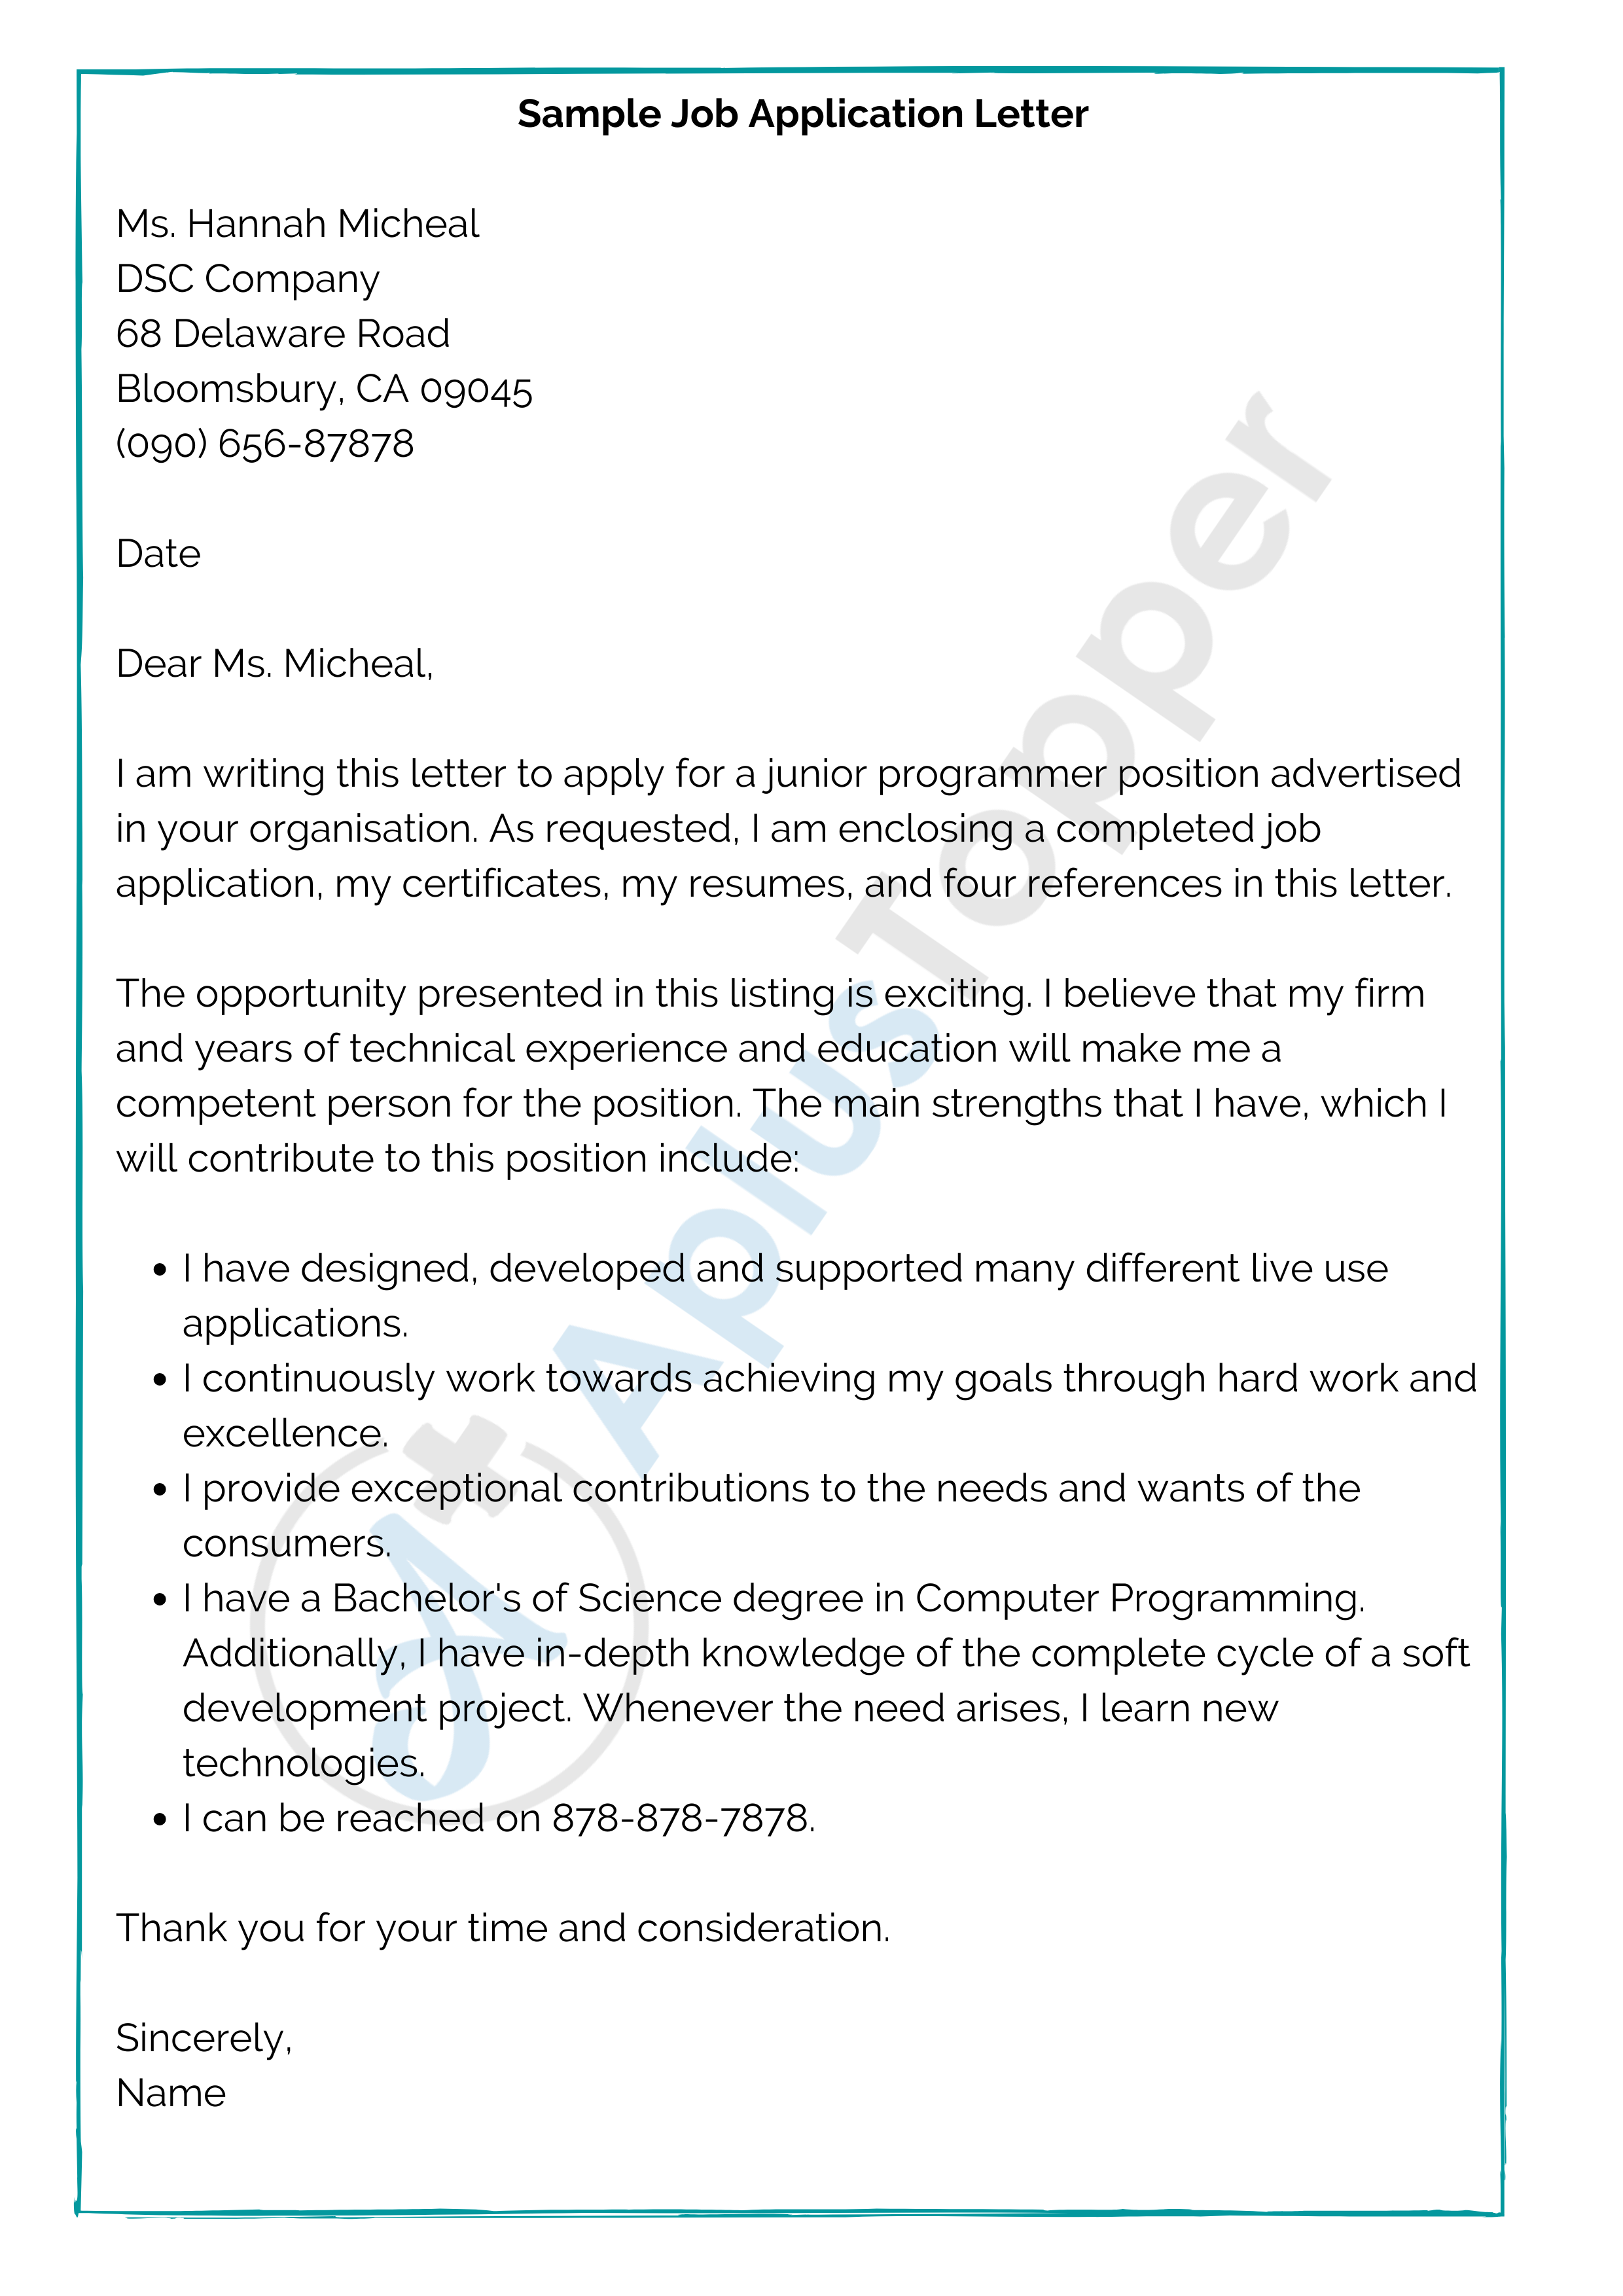 complete the application letter for the job in 2